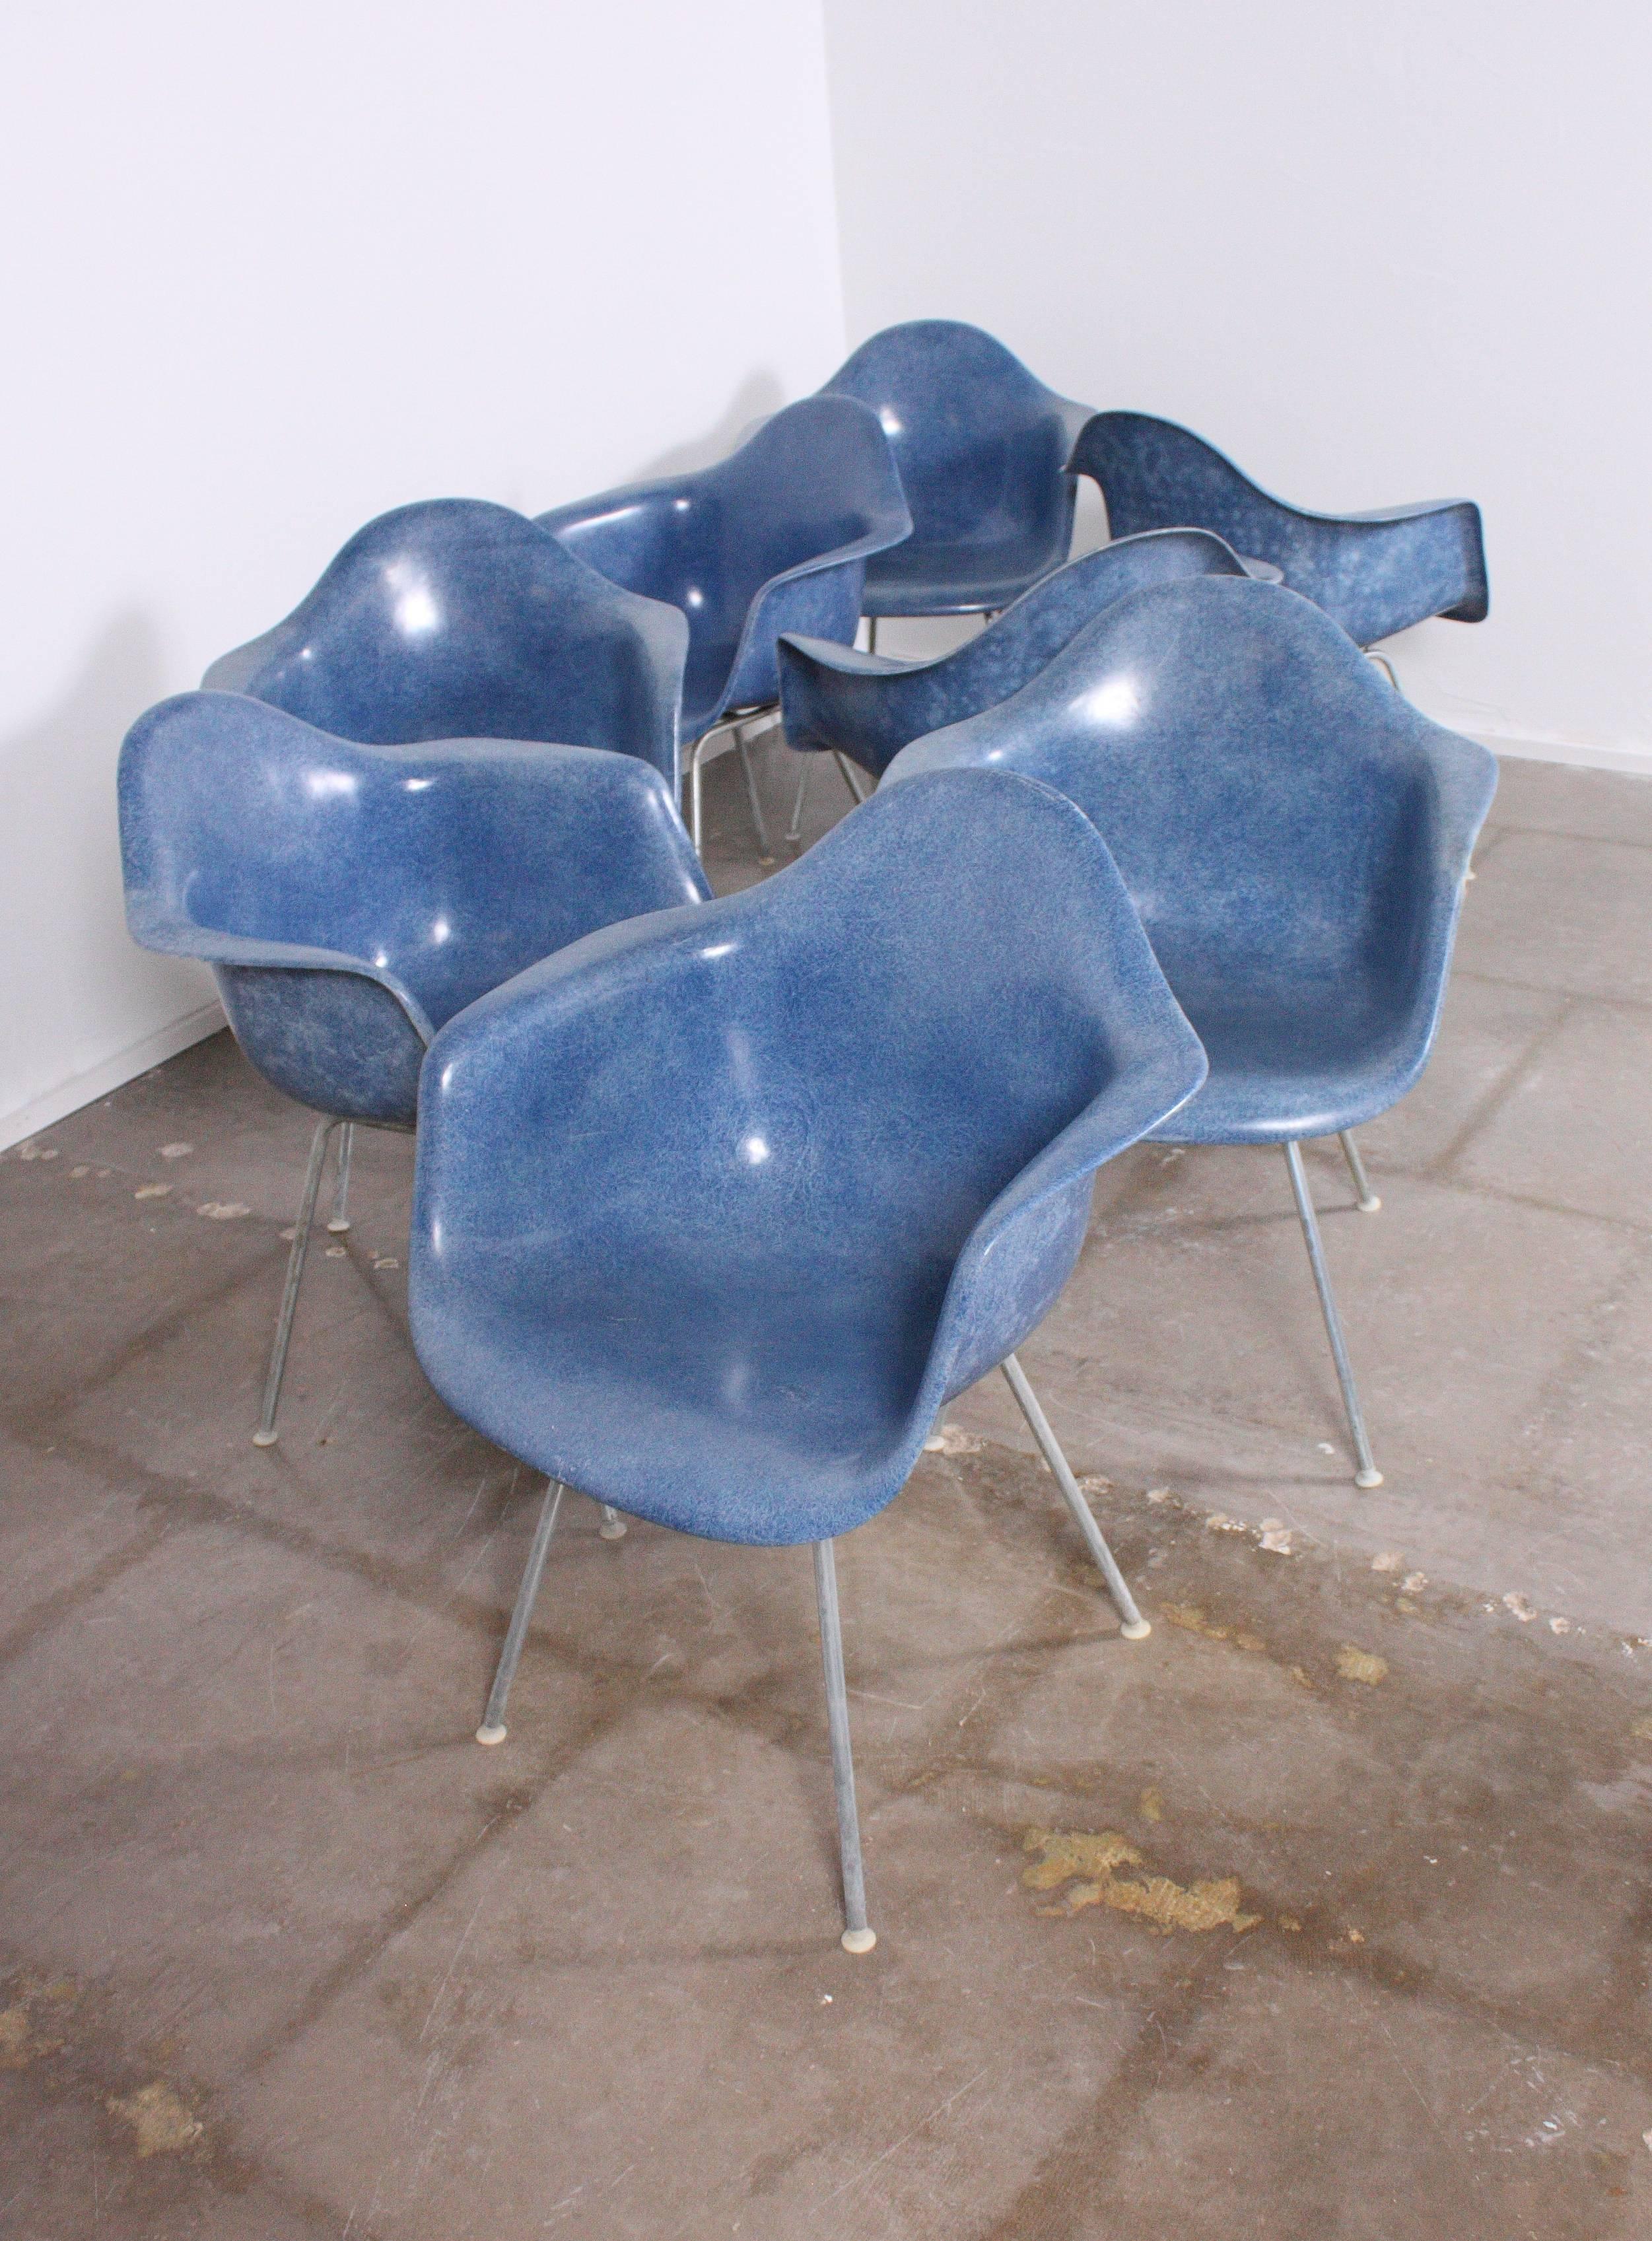 American Rare Blue Fiberglass Shell Chairs by Charles Eames for Herman Miller